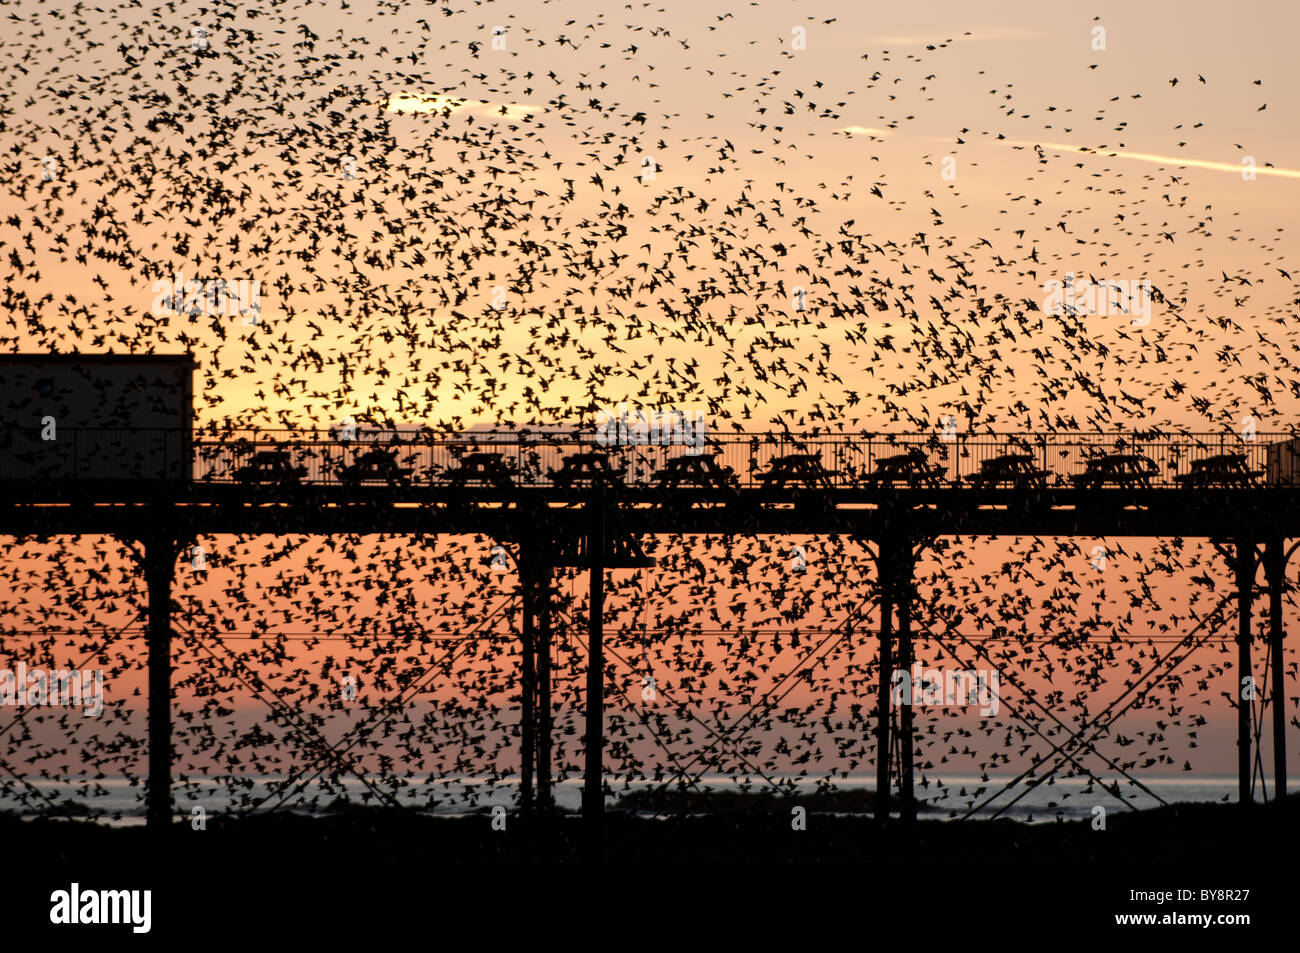 A flock of starlings roosting at Aberystwyth pier, Ceredigion, West Wales UK Stock Photo